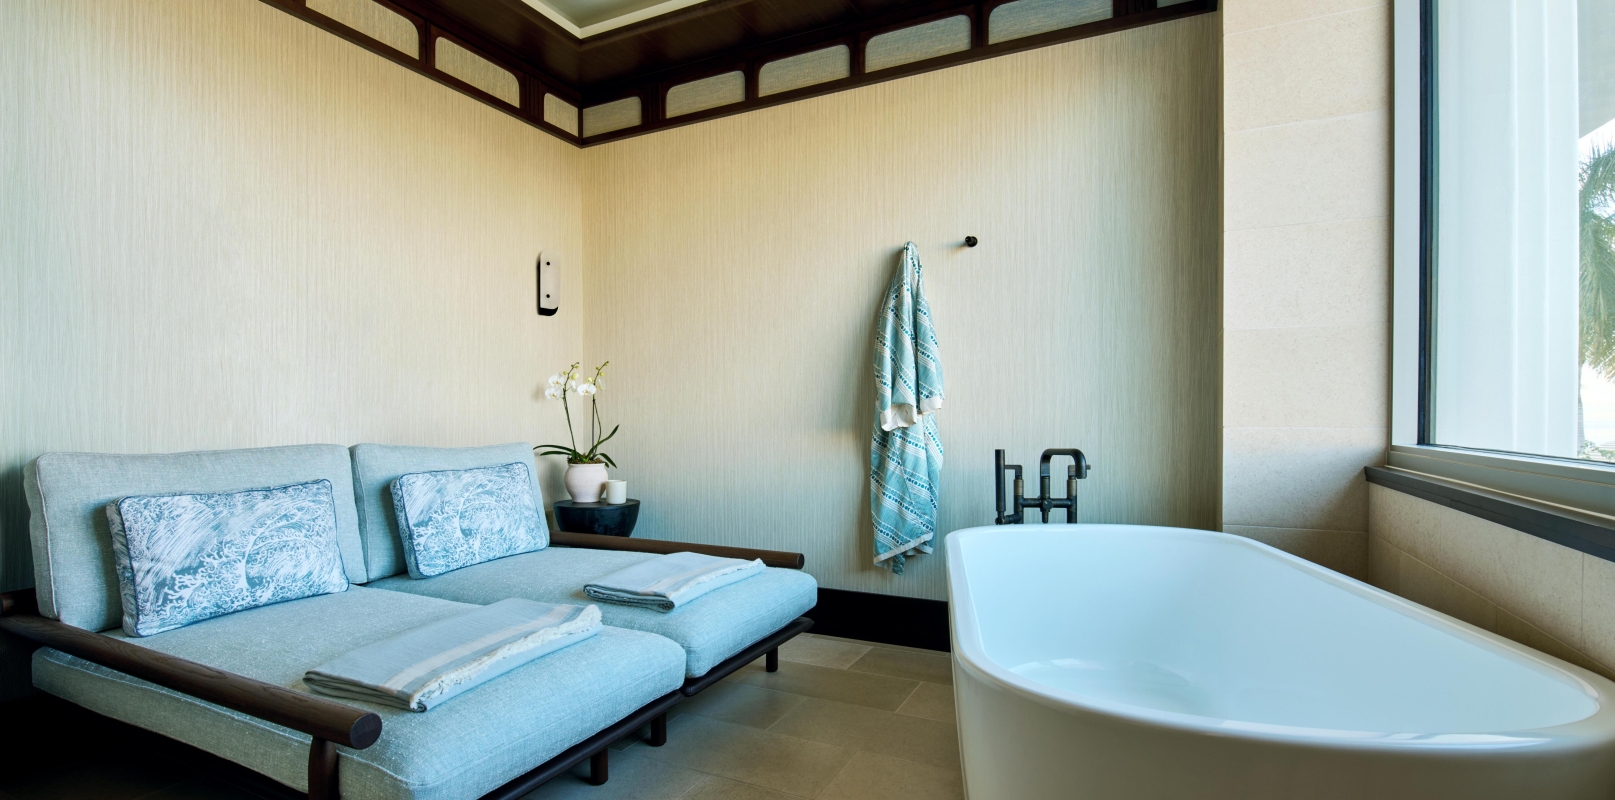 Couples Treatment Room with bath